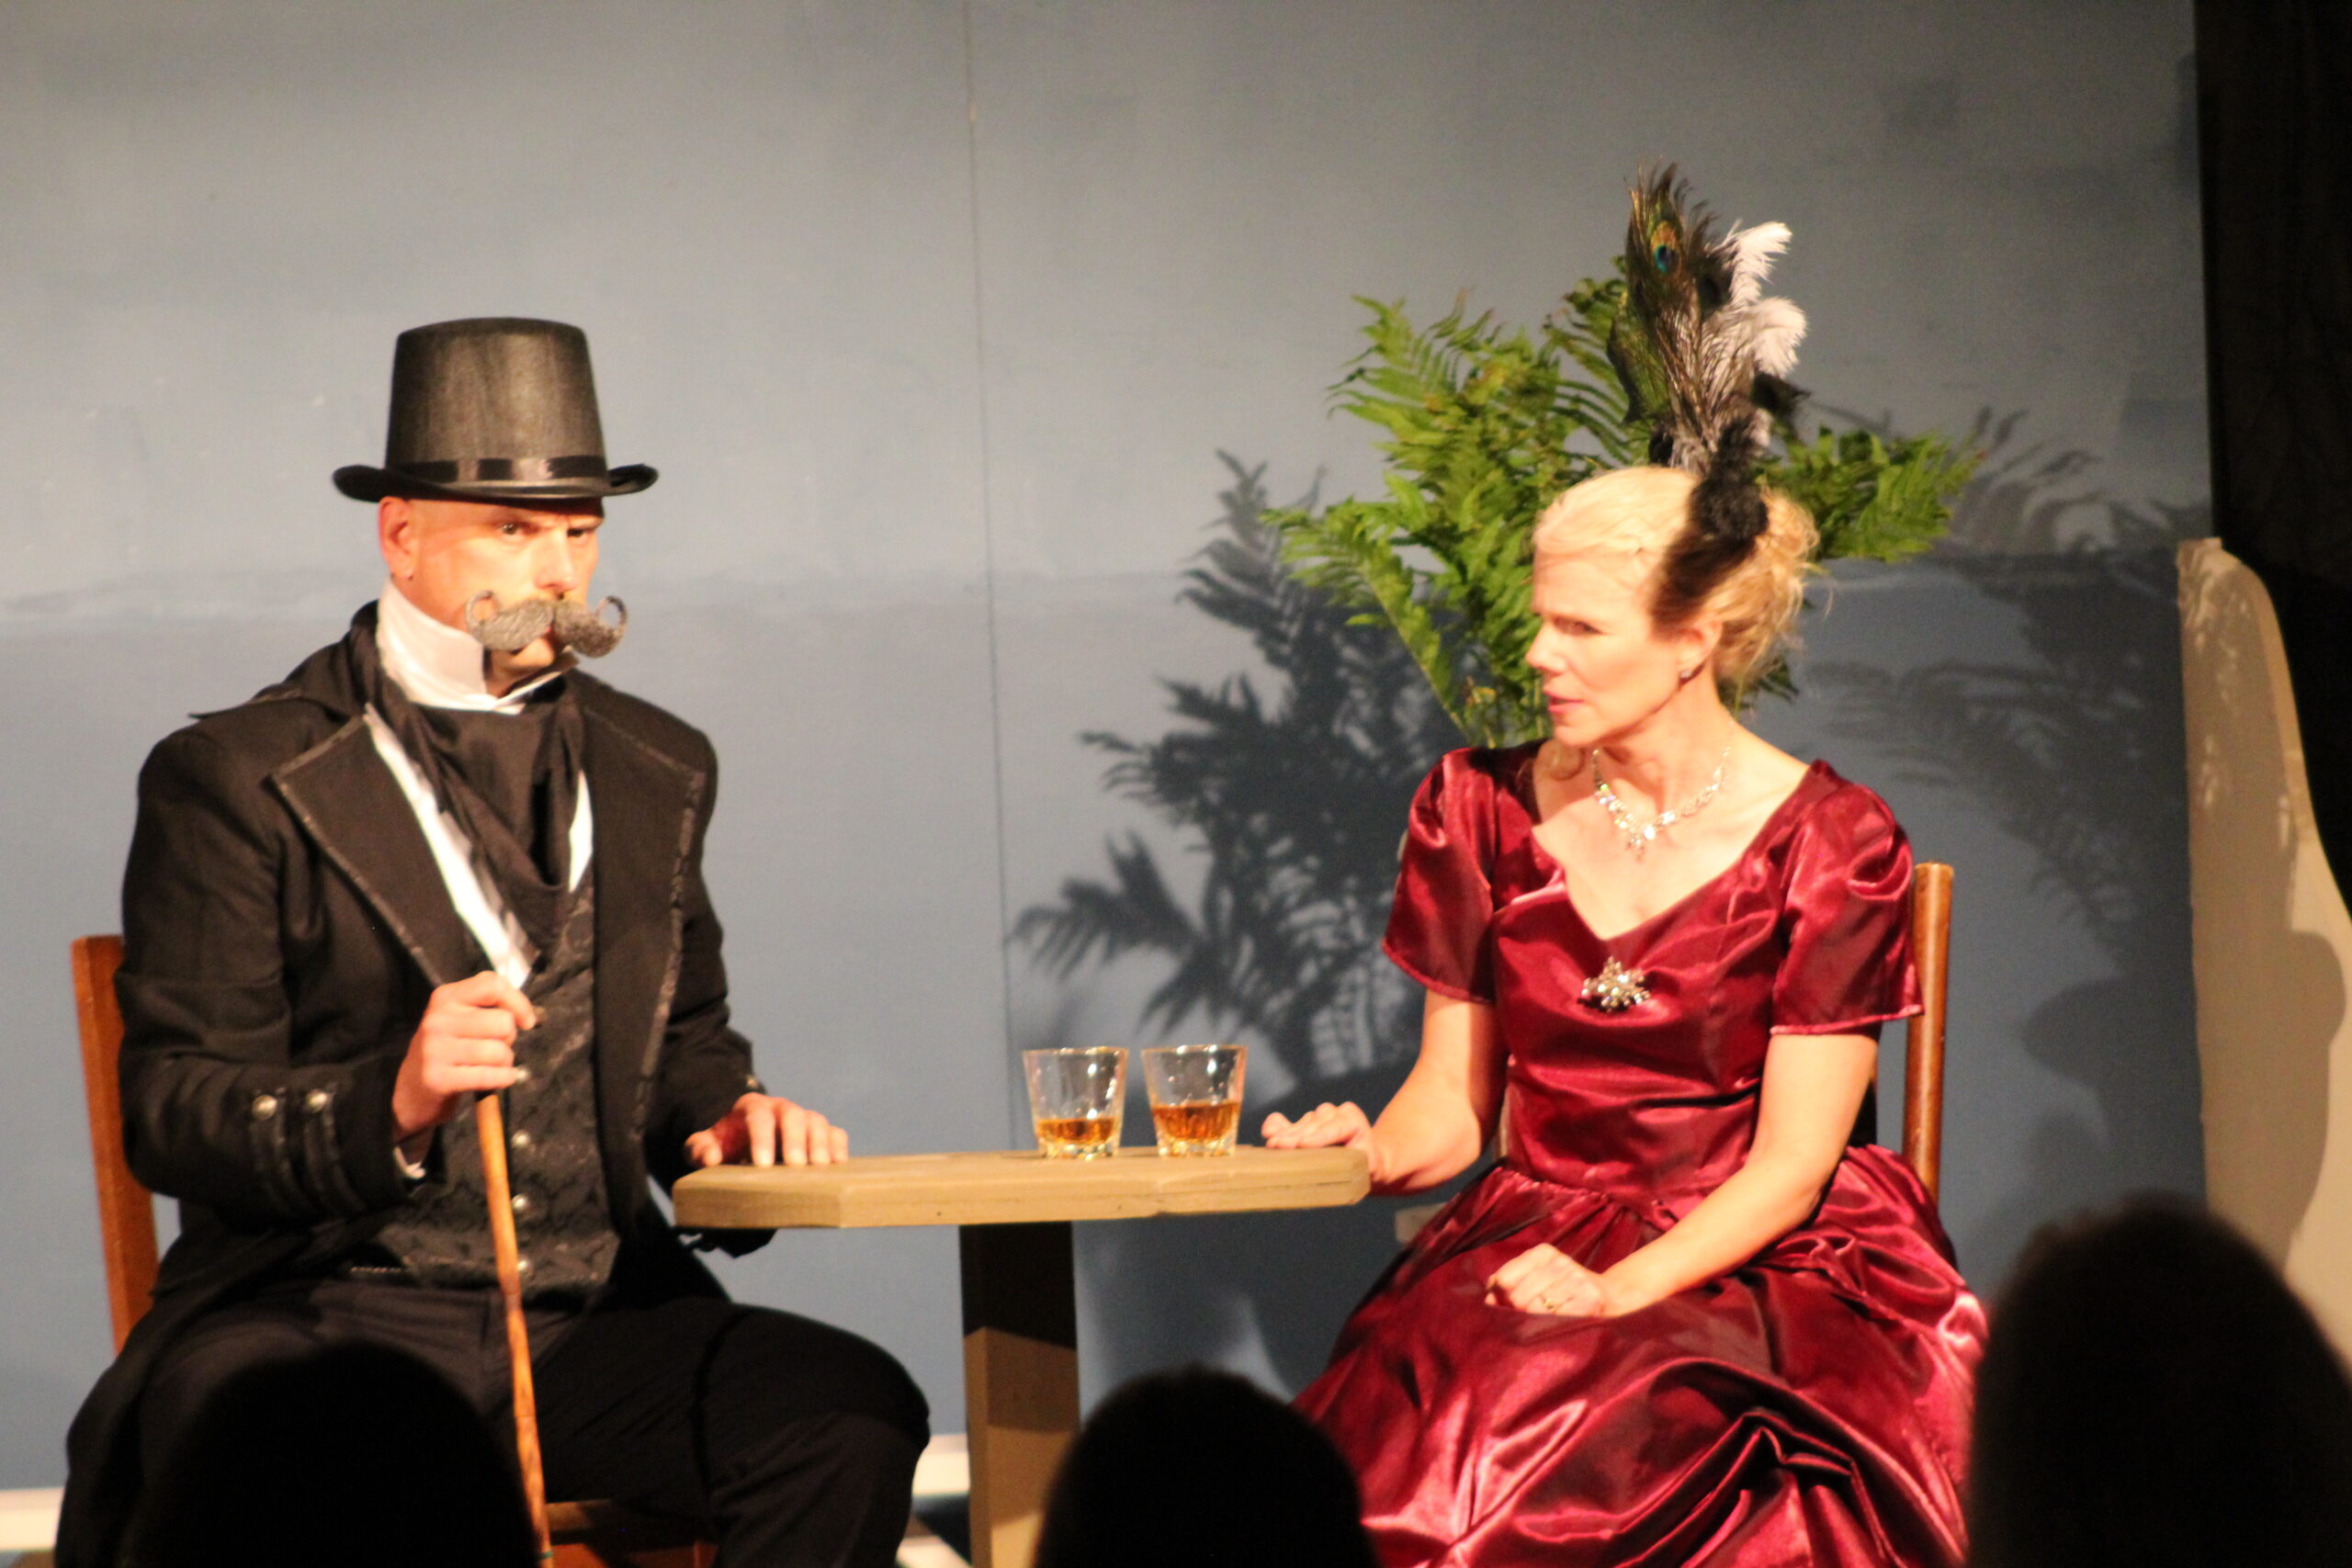 Andre LeTendre-Wilcox (left) and Maria Lockwood (right) as the characters Malachi and Fanny in the play "You Can't Keep a Good Man Down" at the Time Arc Theatre July 2022 in Superior. Photo courtesy of the Time Arc Theatre.